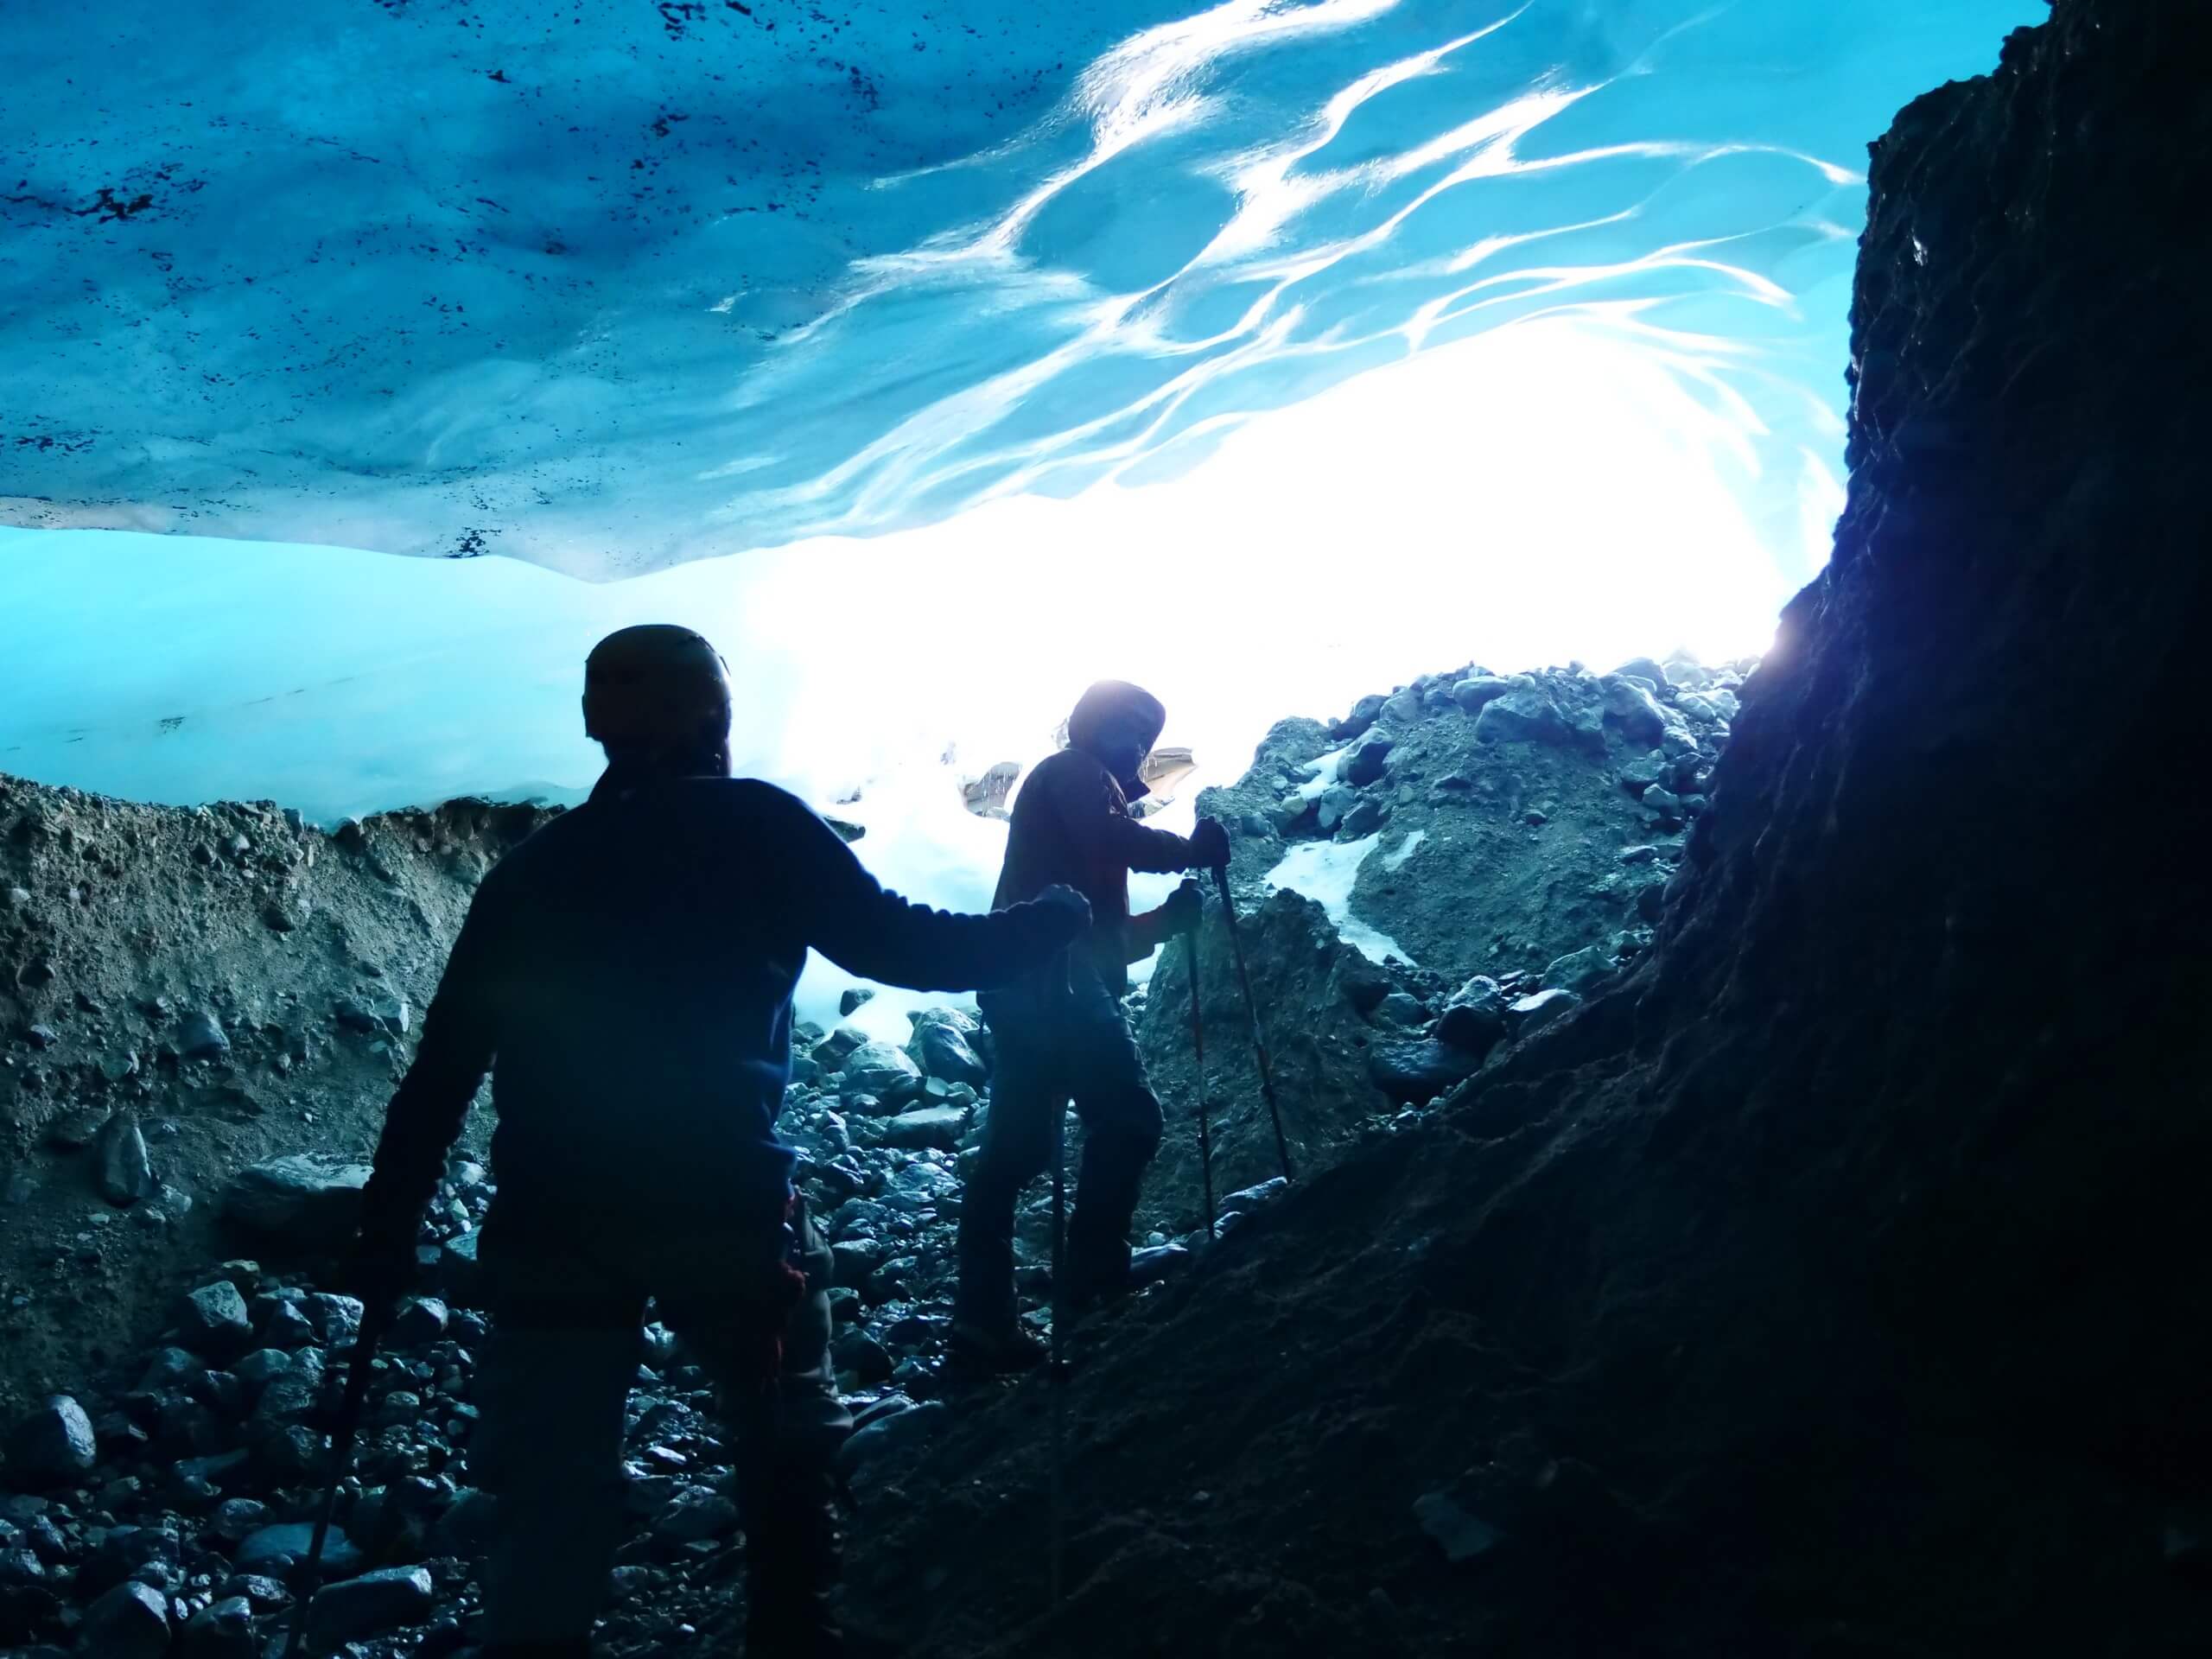 Checking out the ice cave near the Onion